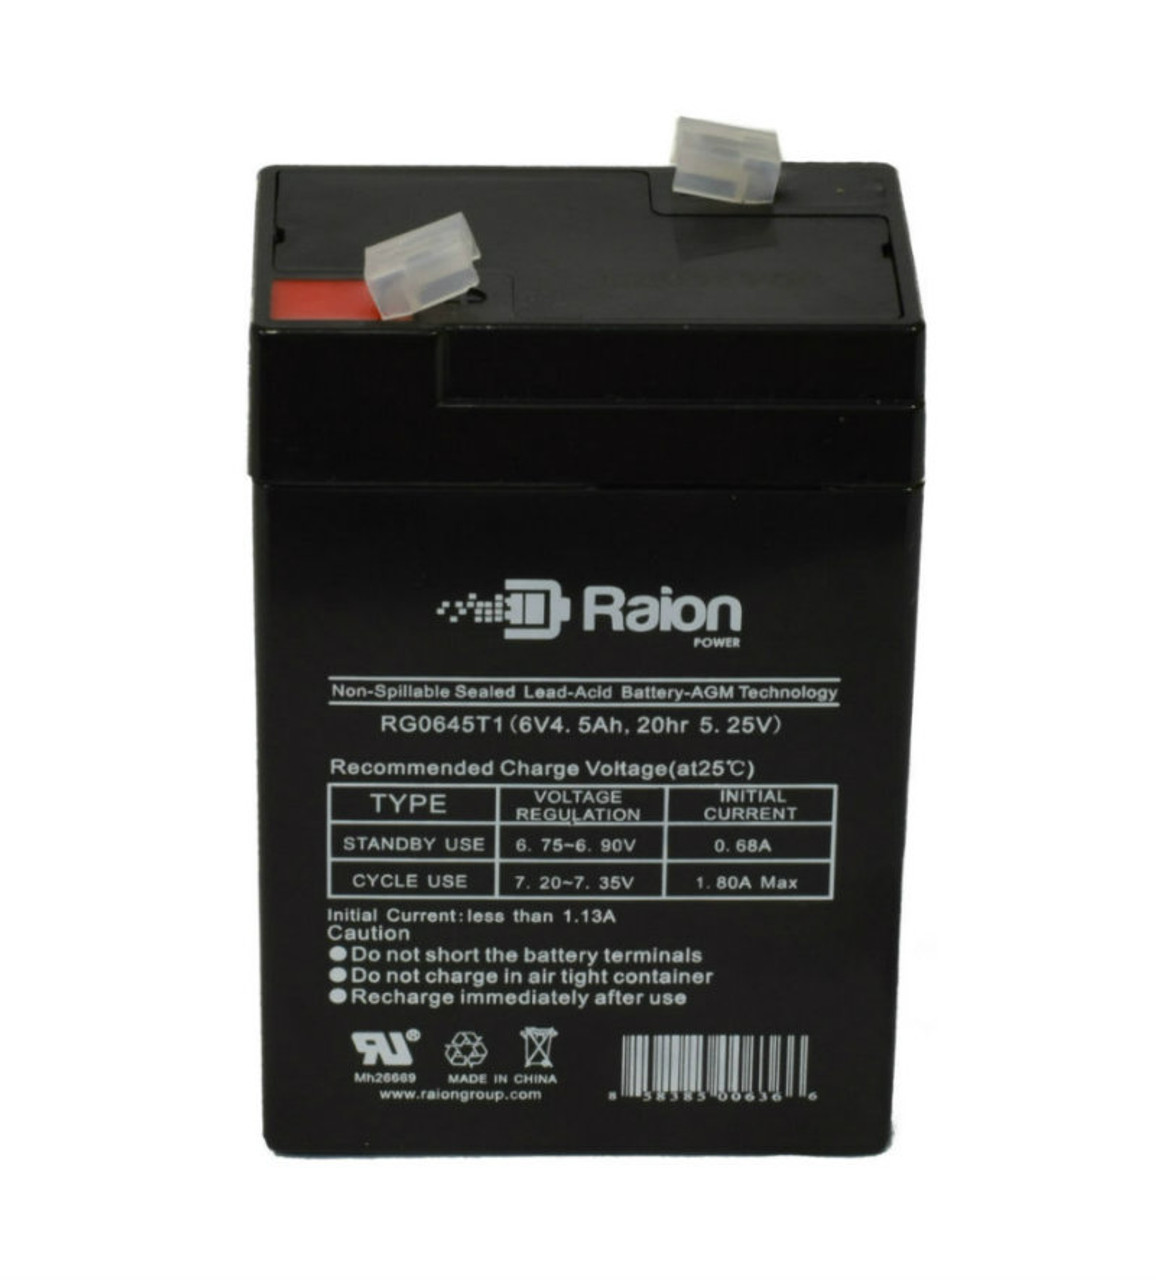 Raion Power RG0645T1 Replacement Battery Cartridge for Sho-Me 9985